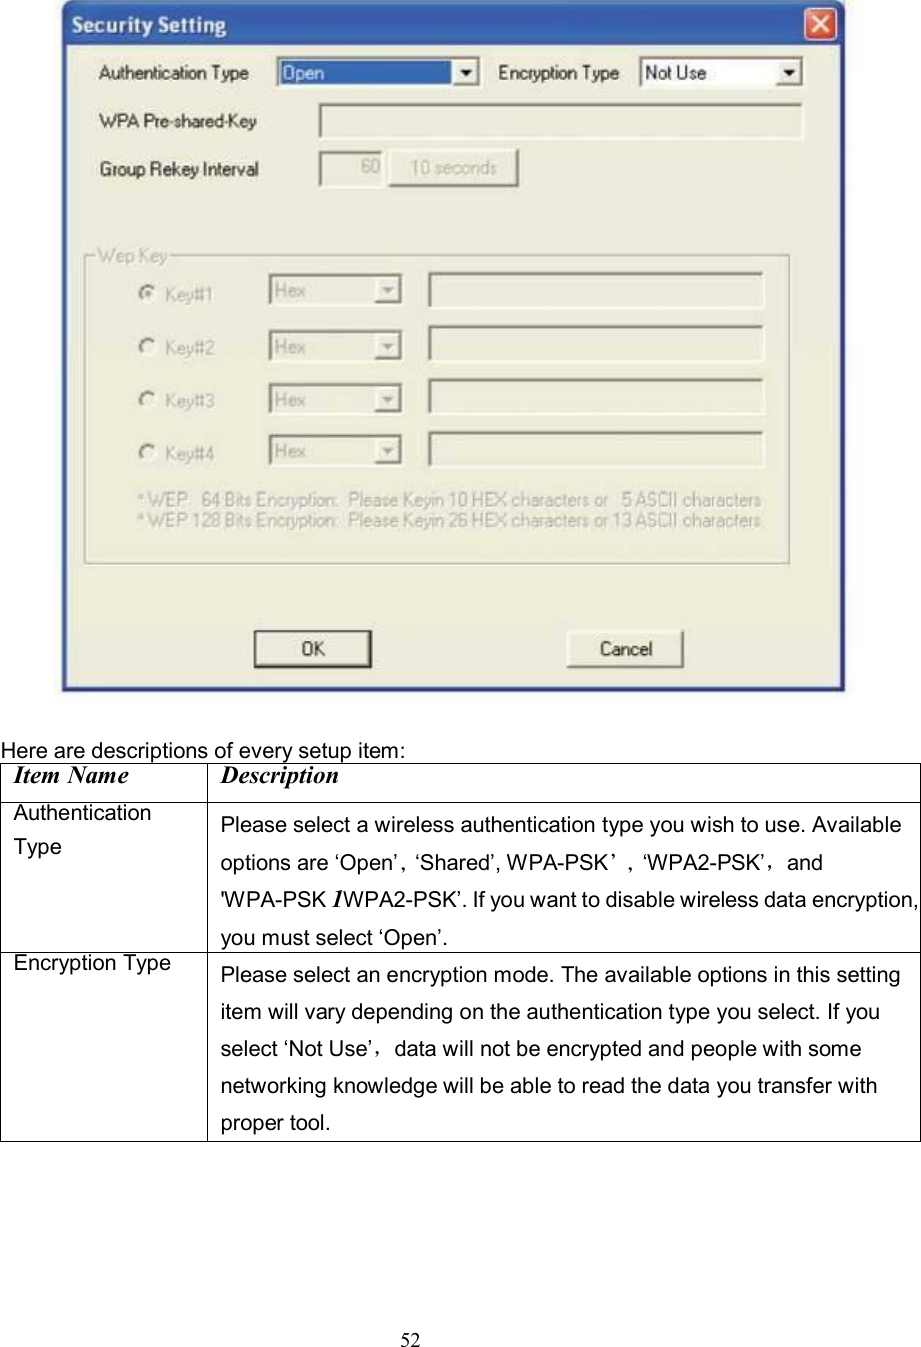 52     Here are descriptions of every setup item: Item Name Description Authentication Type Please select a wireless authentication type you wish to use. Available options are ‘Open’，‘Shared’, WPA-PSK’， ‘WPA2-PSK’，and &apos;WPA-PSK 1WPA2-PSK’. If you want to disable wireless data encryption, you must select ‘Open’. Encryption Type  Please select an encryption mode. The available options in this setting item will vary depending on the authentication type you select. If you select ‘Not Use’，data will not be encrypted and people with some networking knowledge will be able to read the data you transfer with proper tool. 